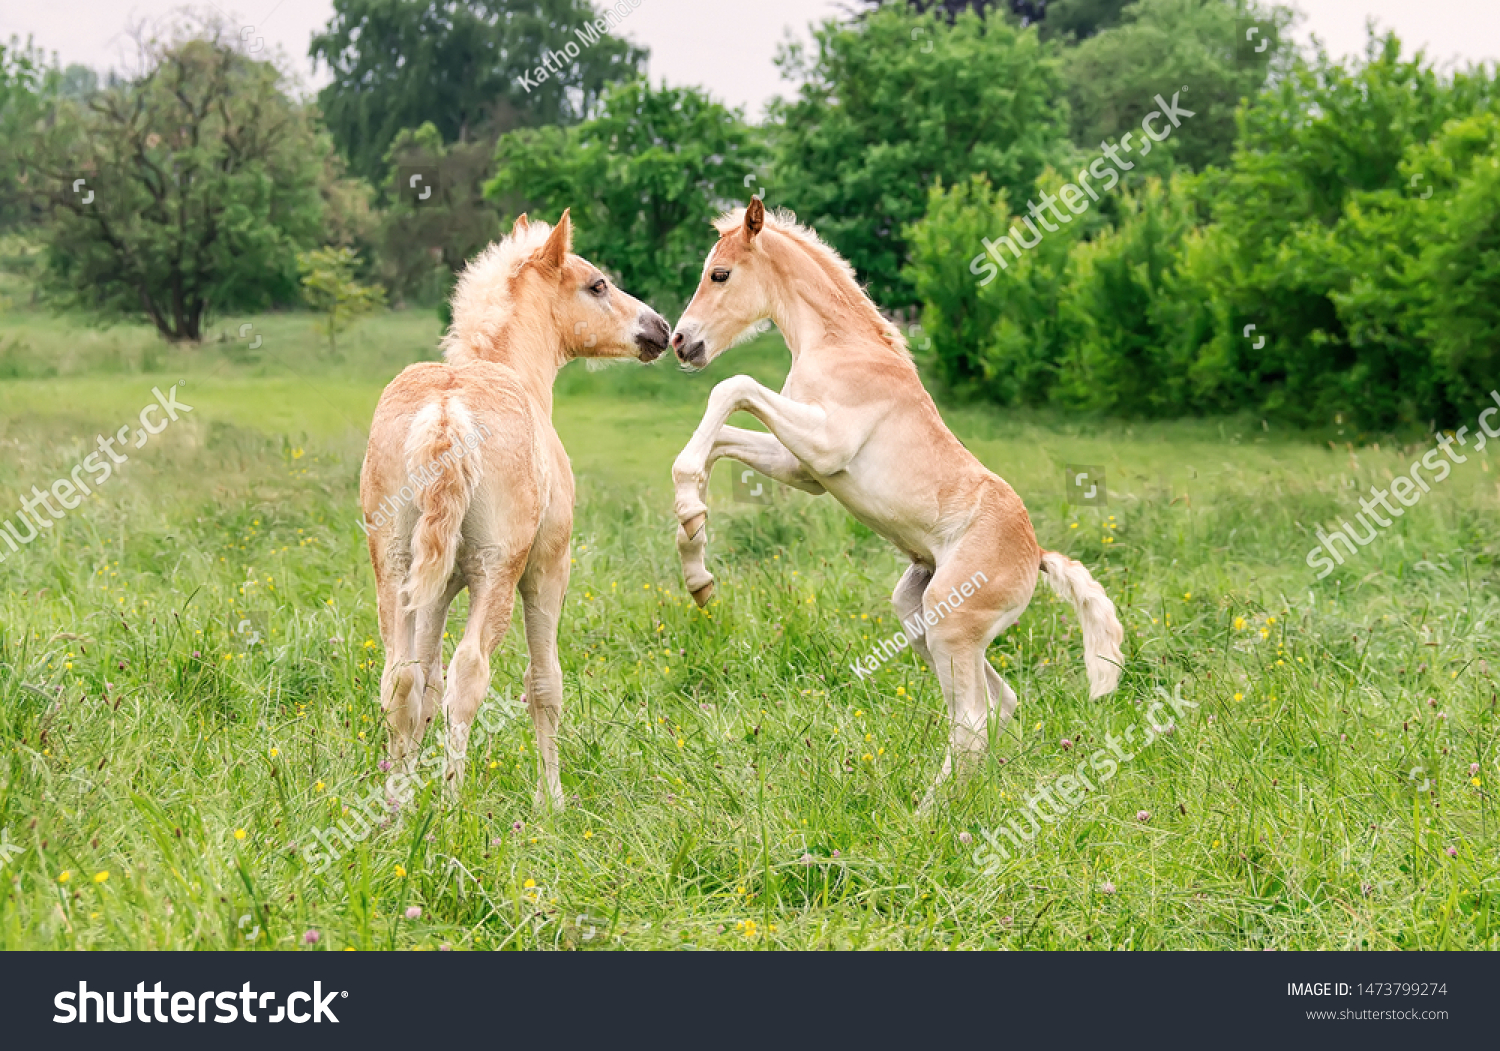 Two cute Haflinger horse foals have fun, playing, rearing and frolic around in a green grass meadow in spring, Germany  #1473799274